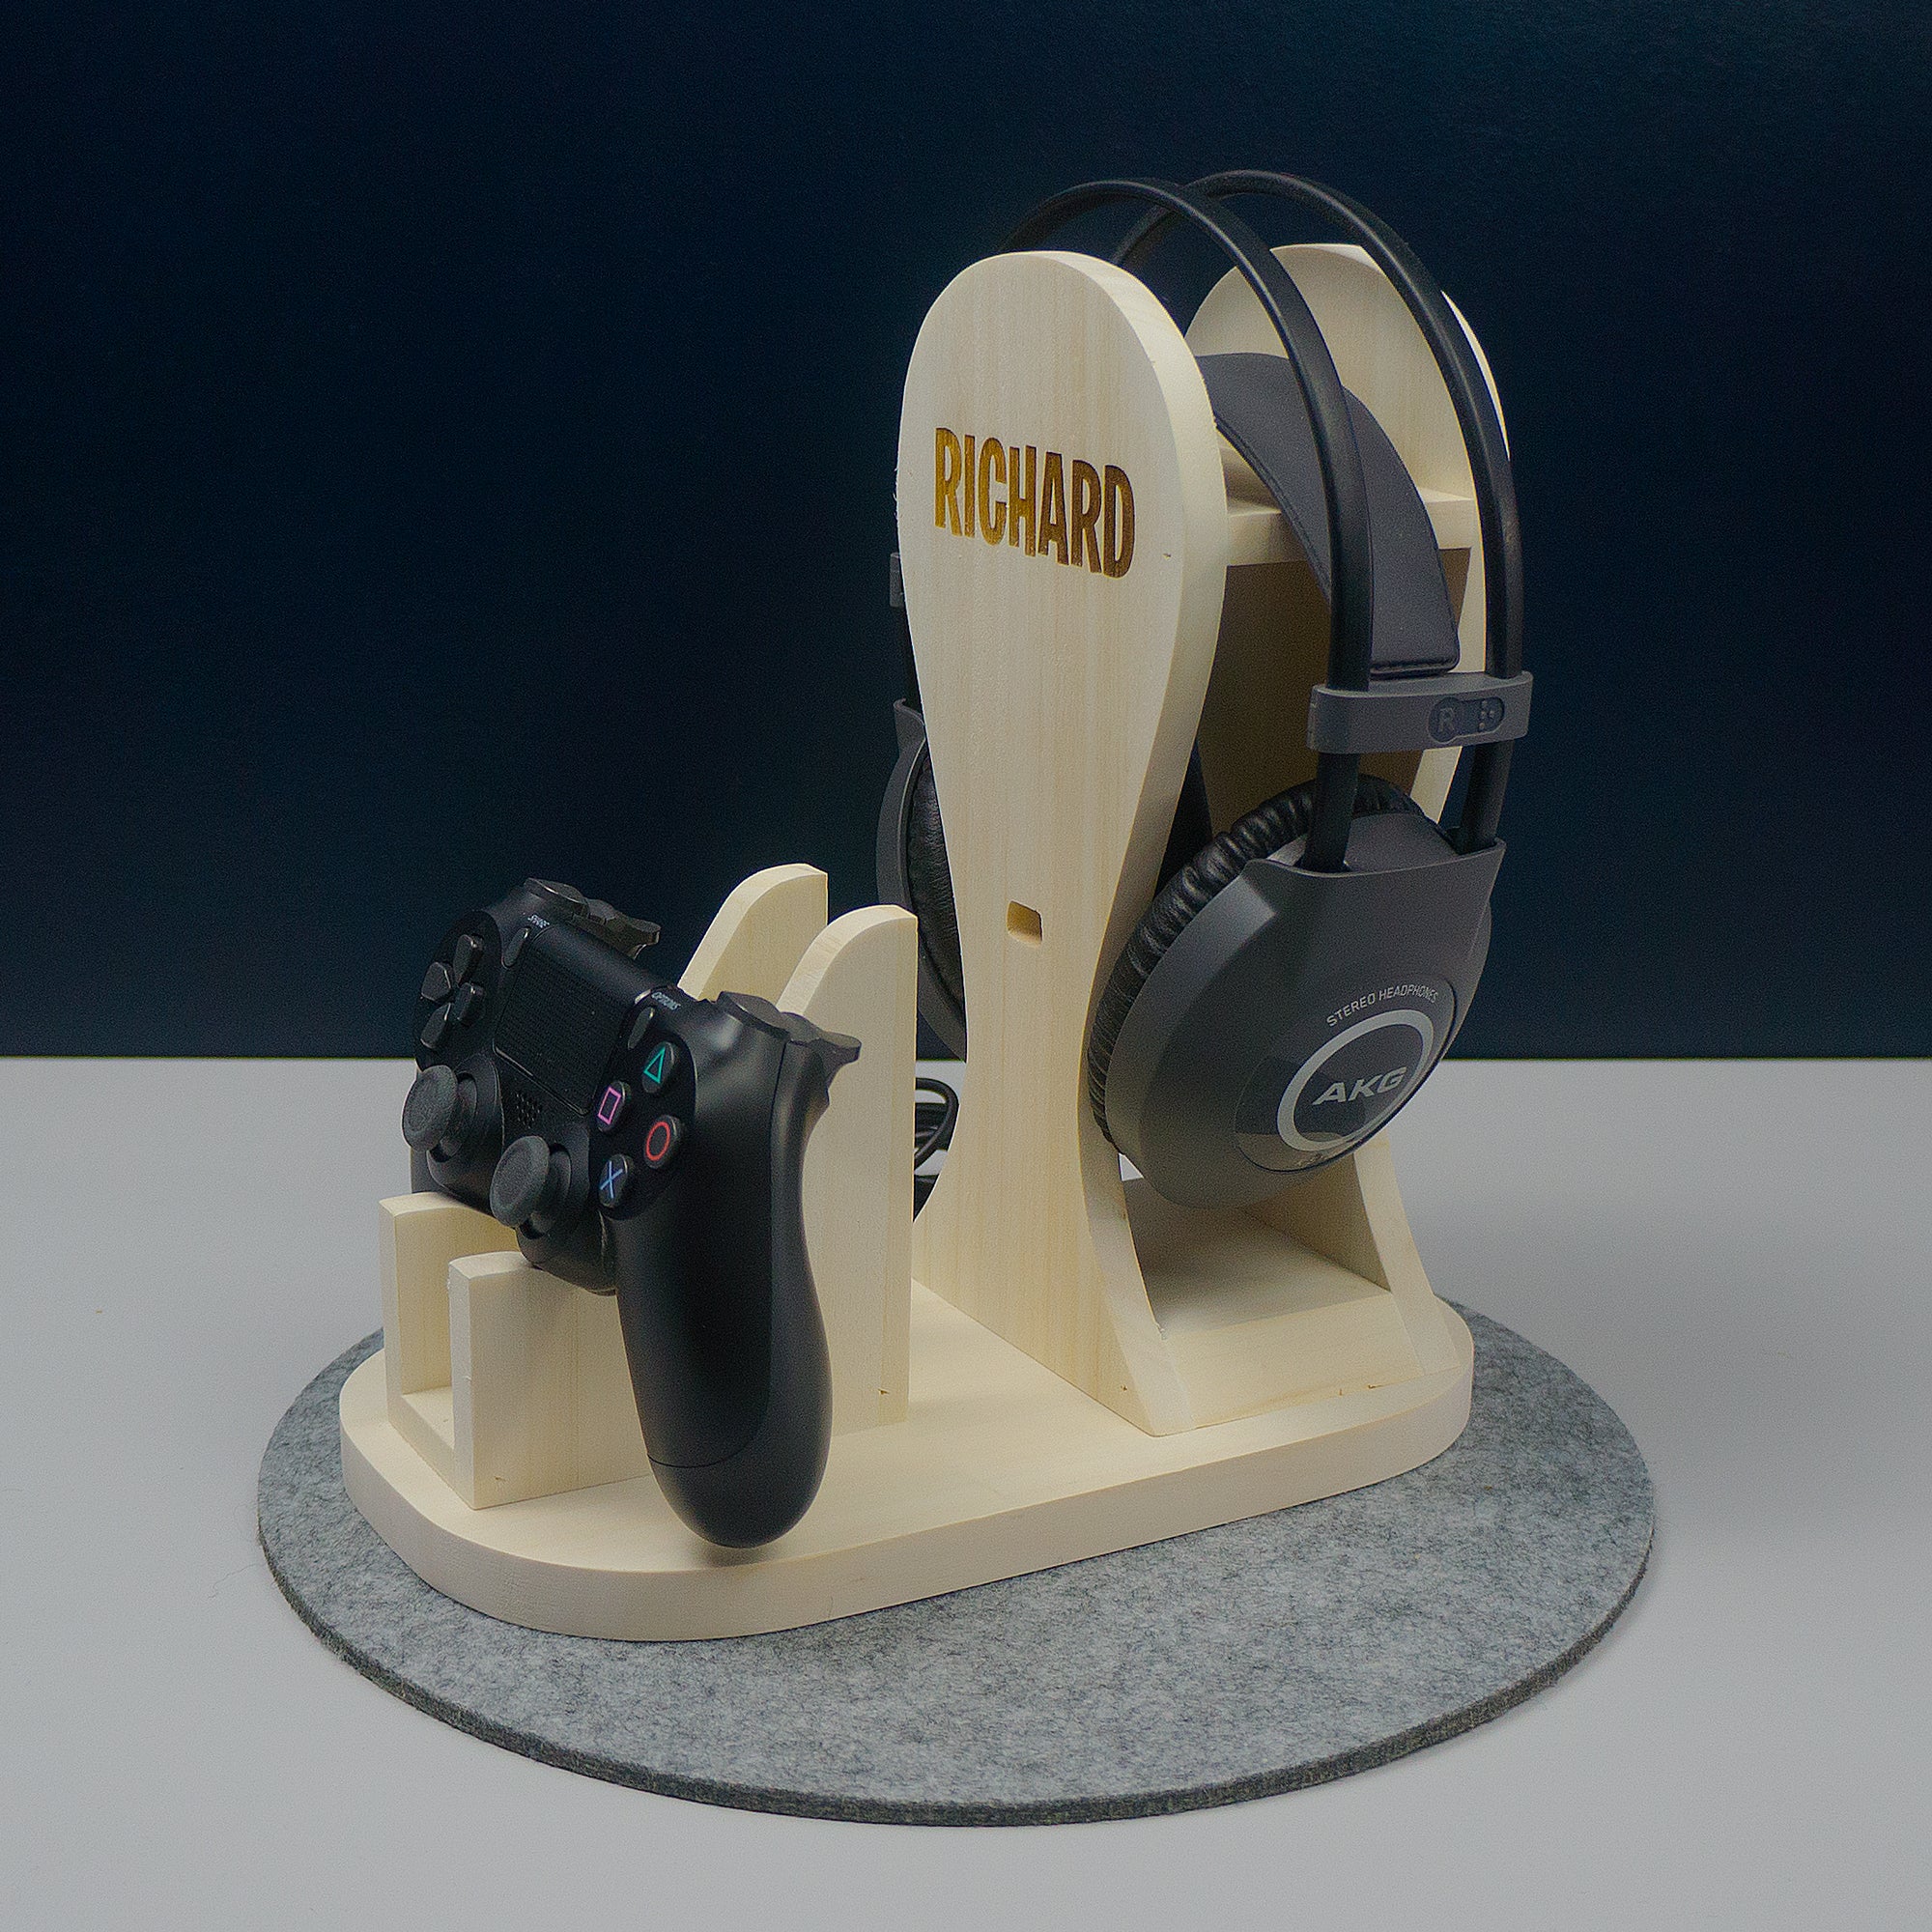 Gaming headphone and controller stand